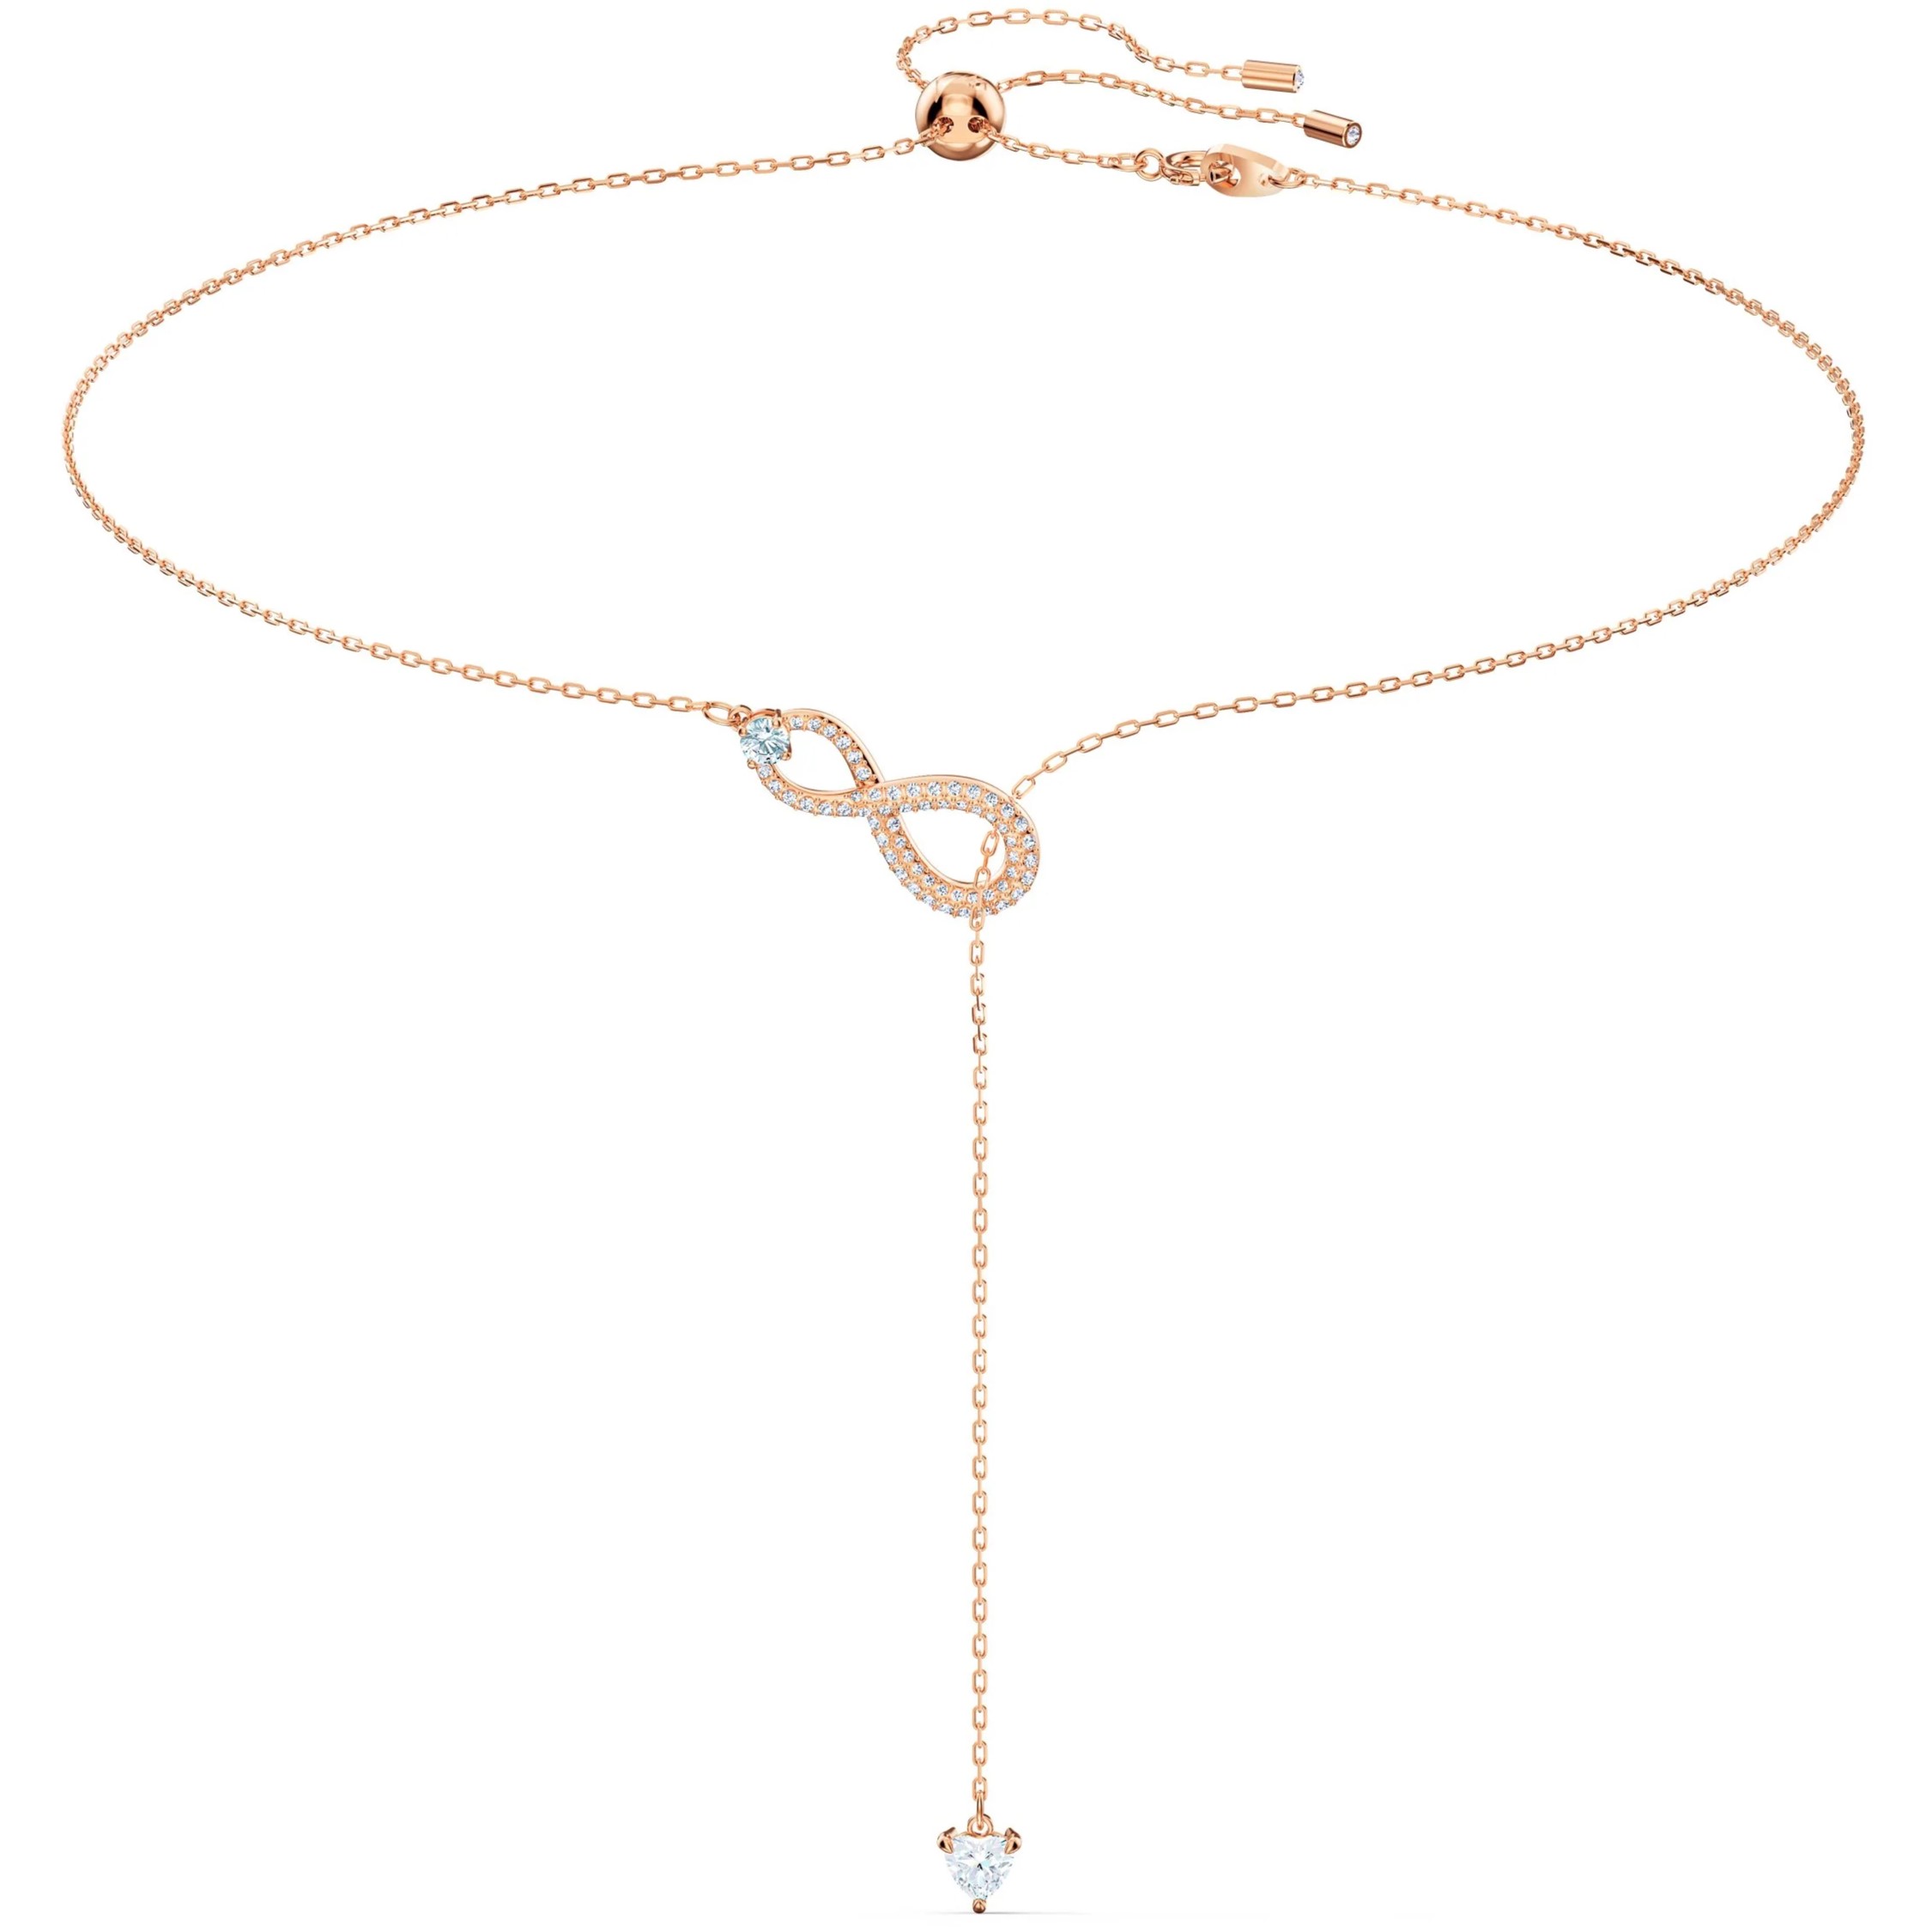 DÂY CHUYỀN THỜI TRANG NỮ SWAROVSKI INFINITY Y NECKLACE WHITE ROSE GOLD-TONE PLATED 5521346 7